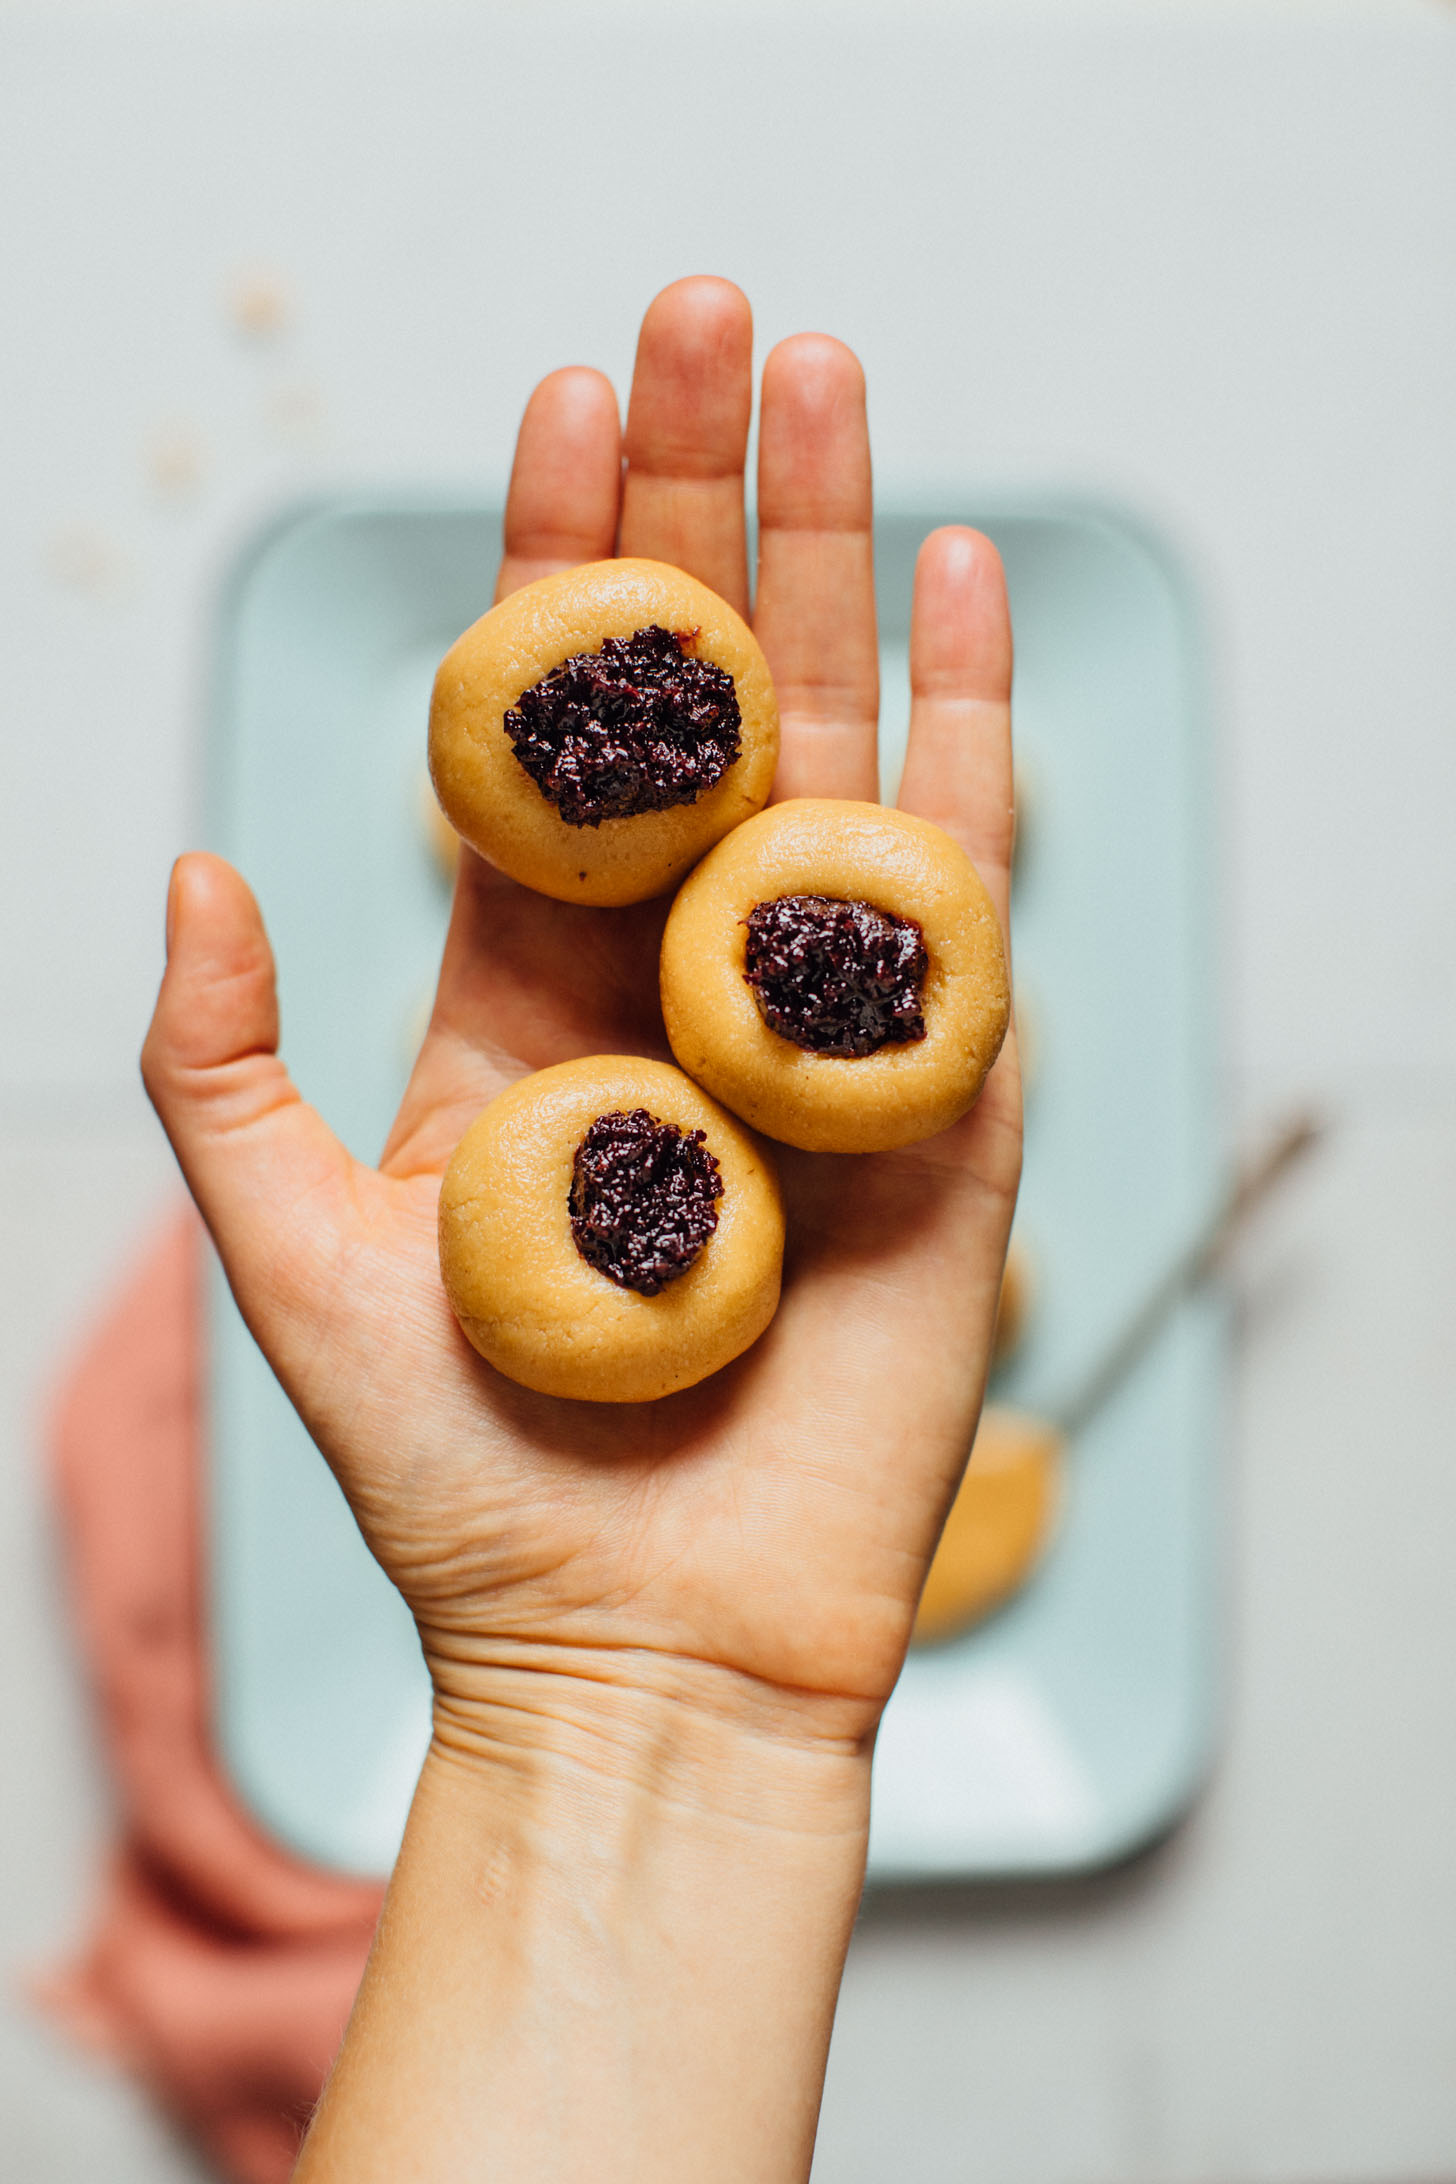 Holding up three of our delicious No Bake Peanut Butter Thumbprint Cookies